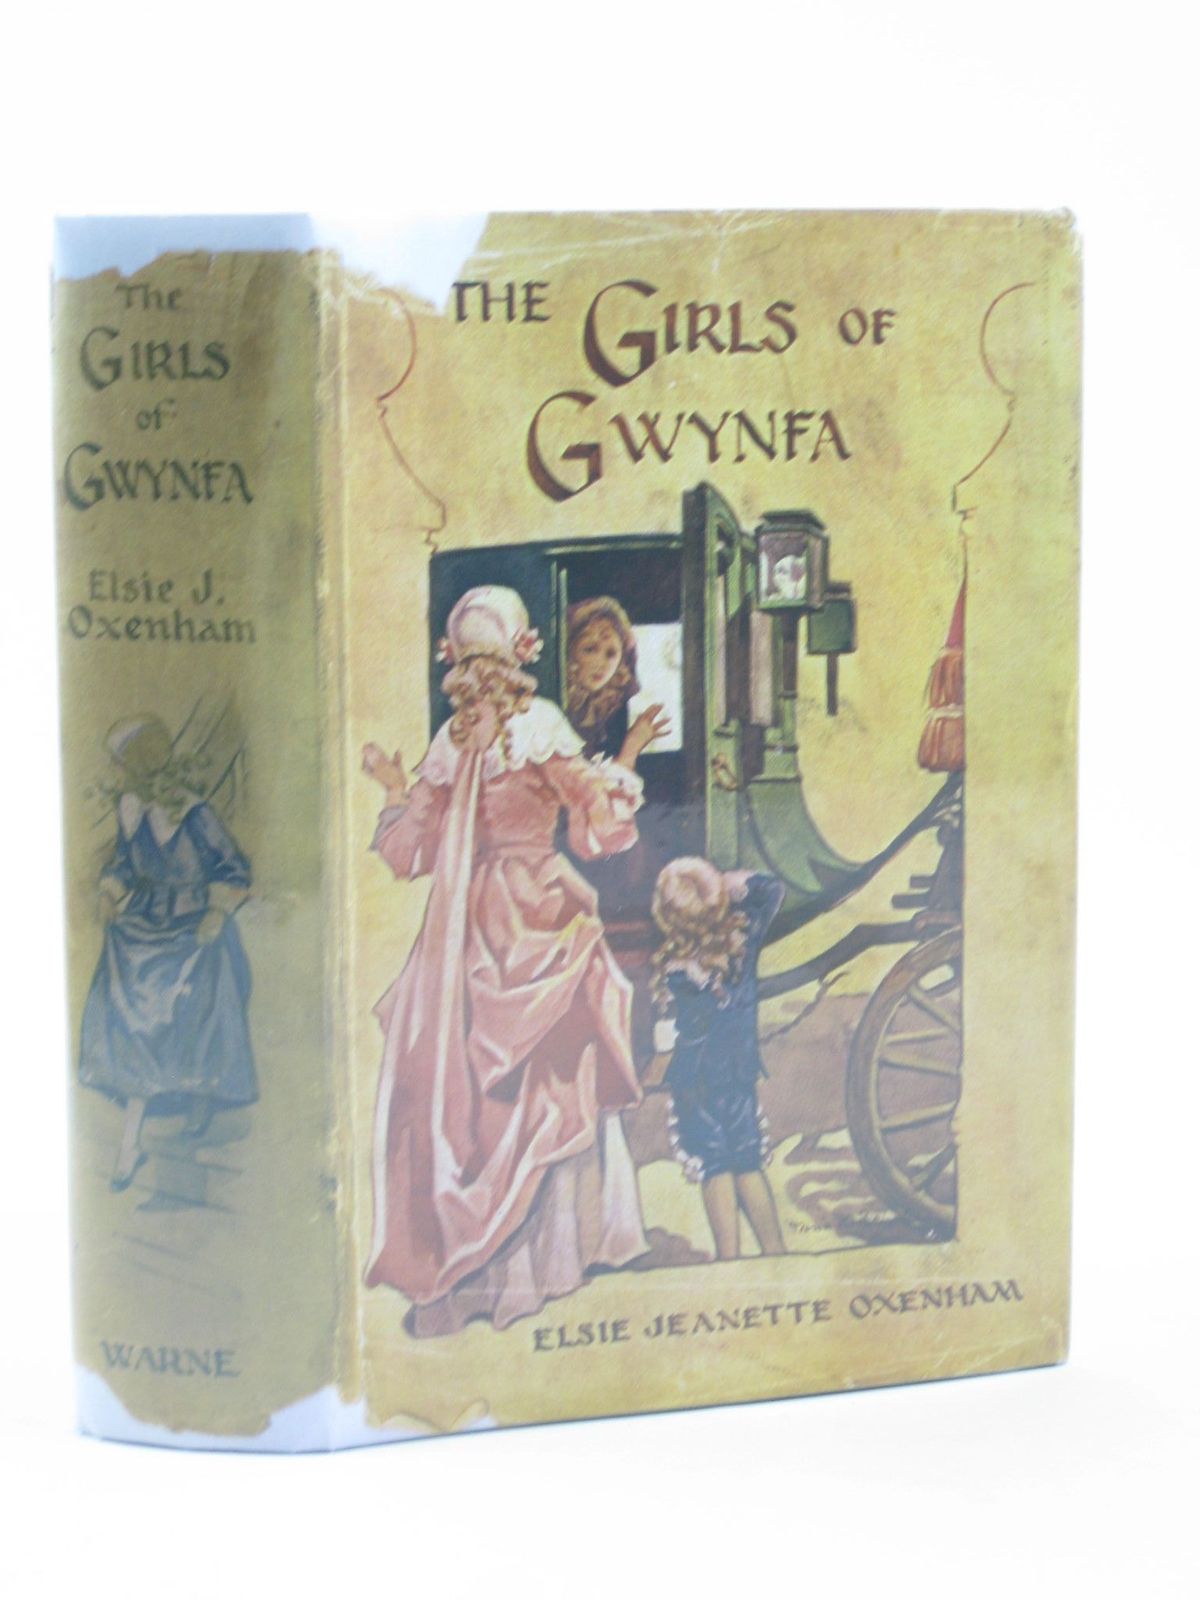 Photo of THE GIRLS OF GWYNFA written by Oxenham, Elsie J. published by Frederick Warne & Co Ltd. (STOCK CODE: 1501811)  for sale by Stella & Rose's Books